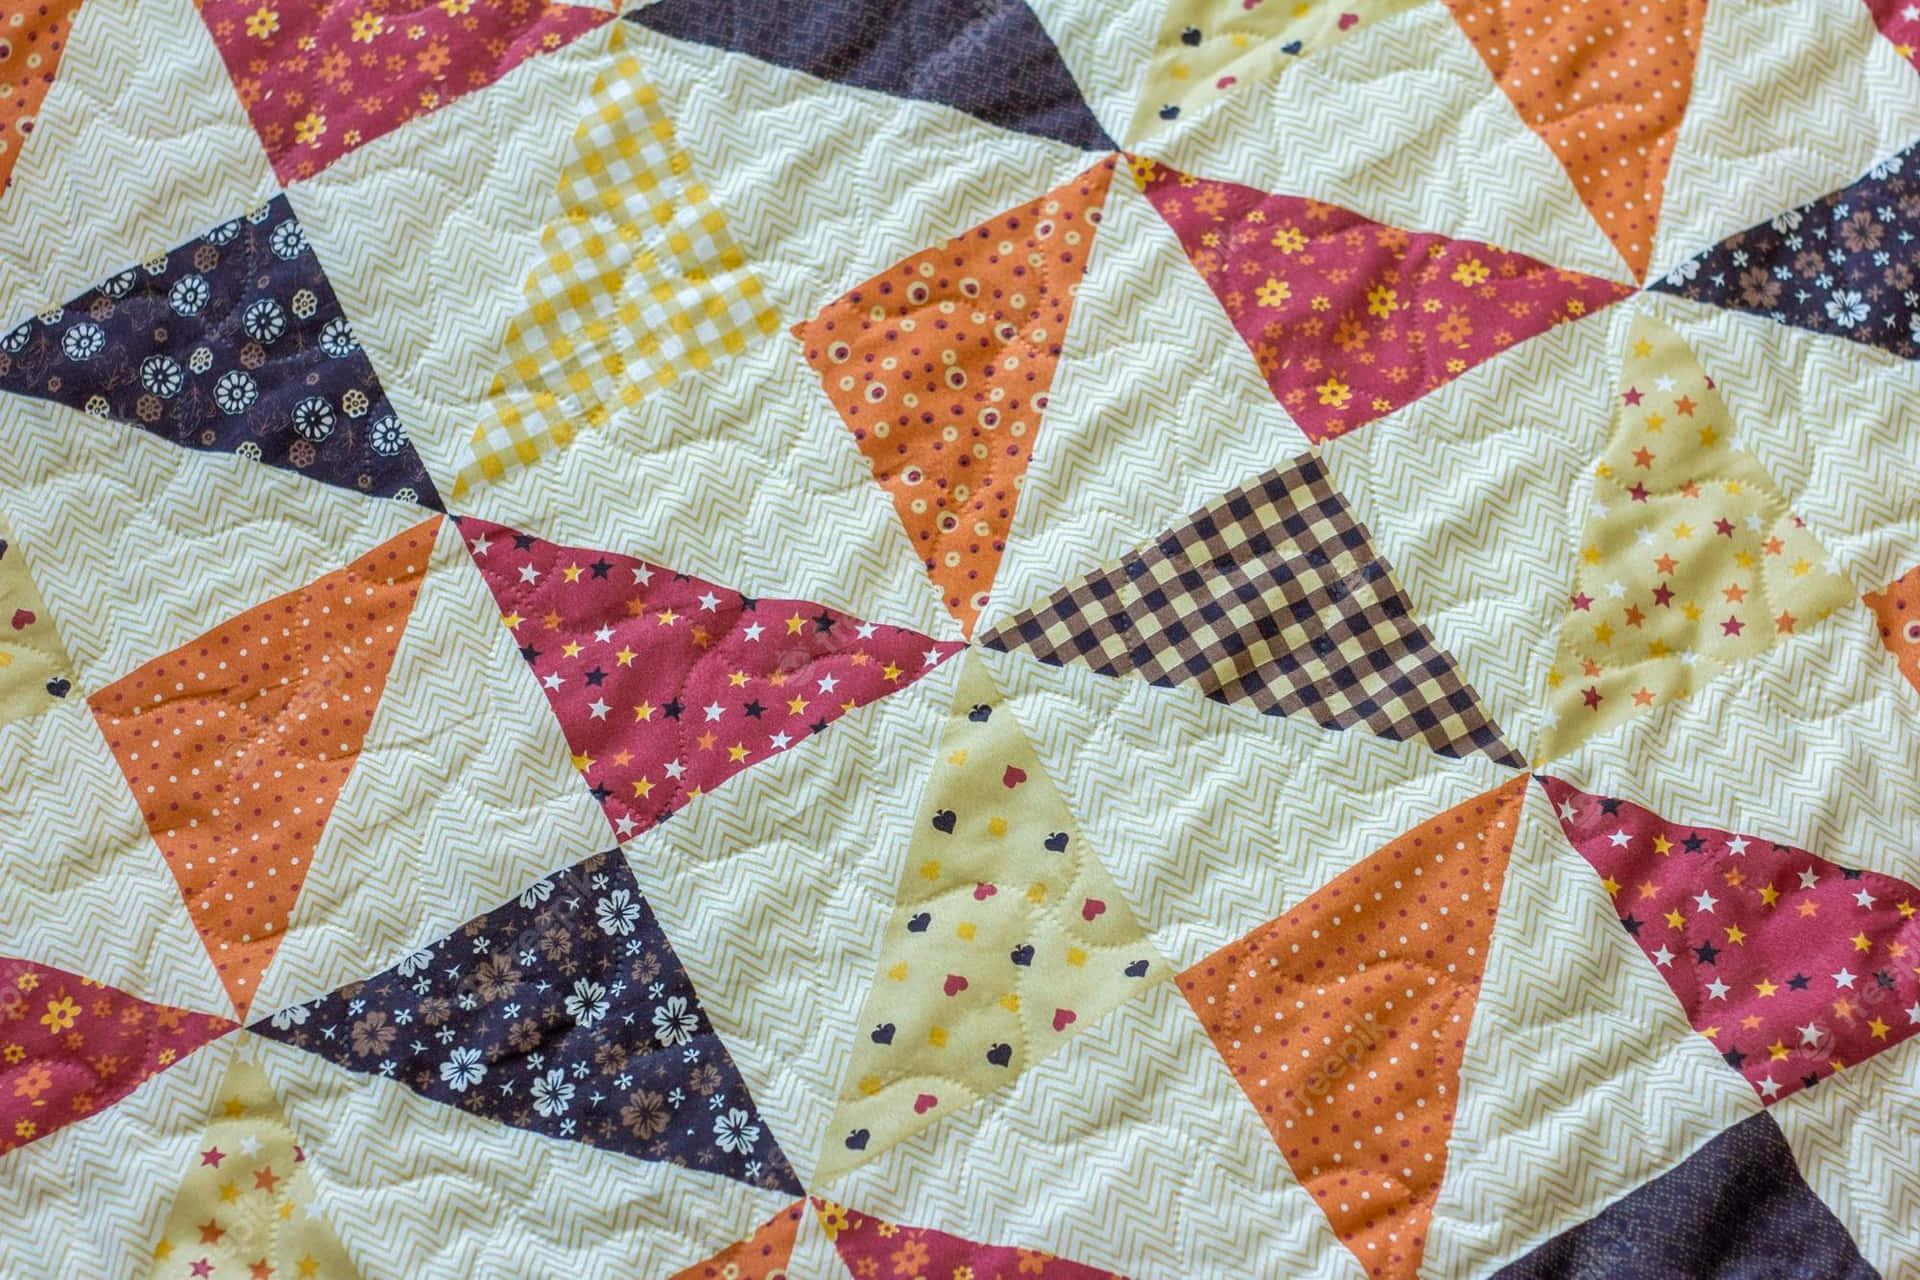 A intricately detailed patchwork quilt Wallpaper